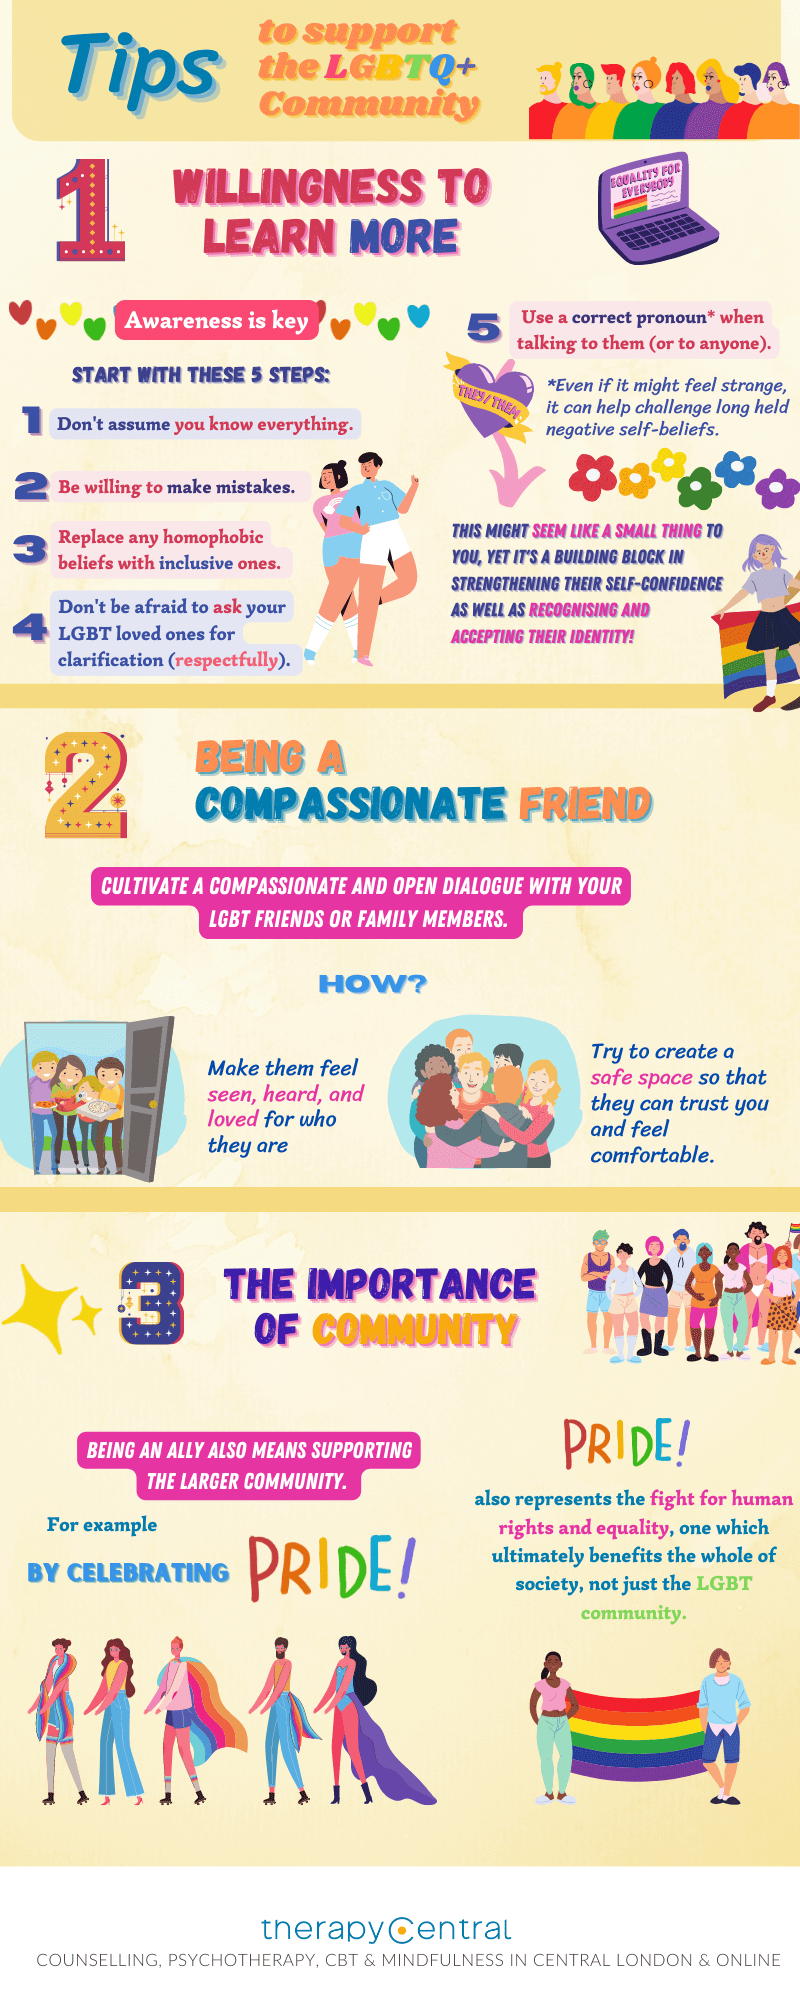 Tips to support the LGBT community